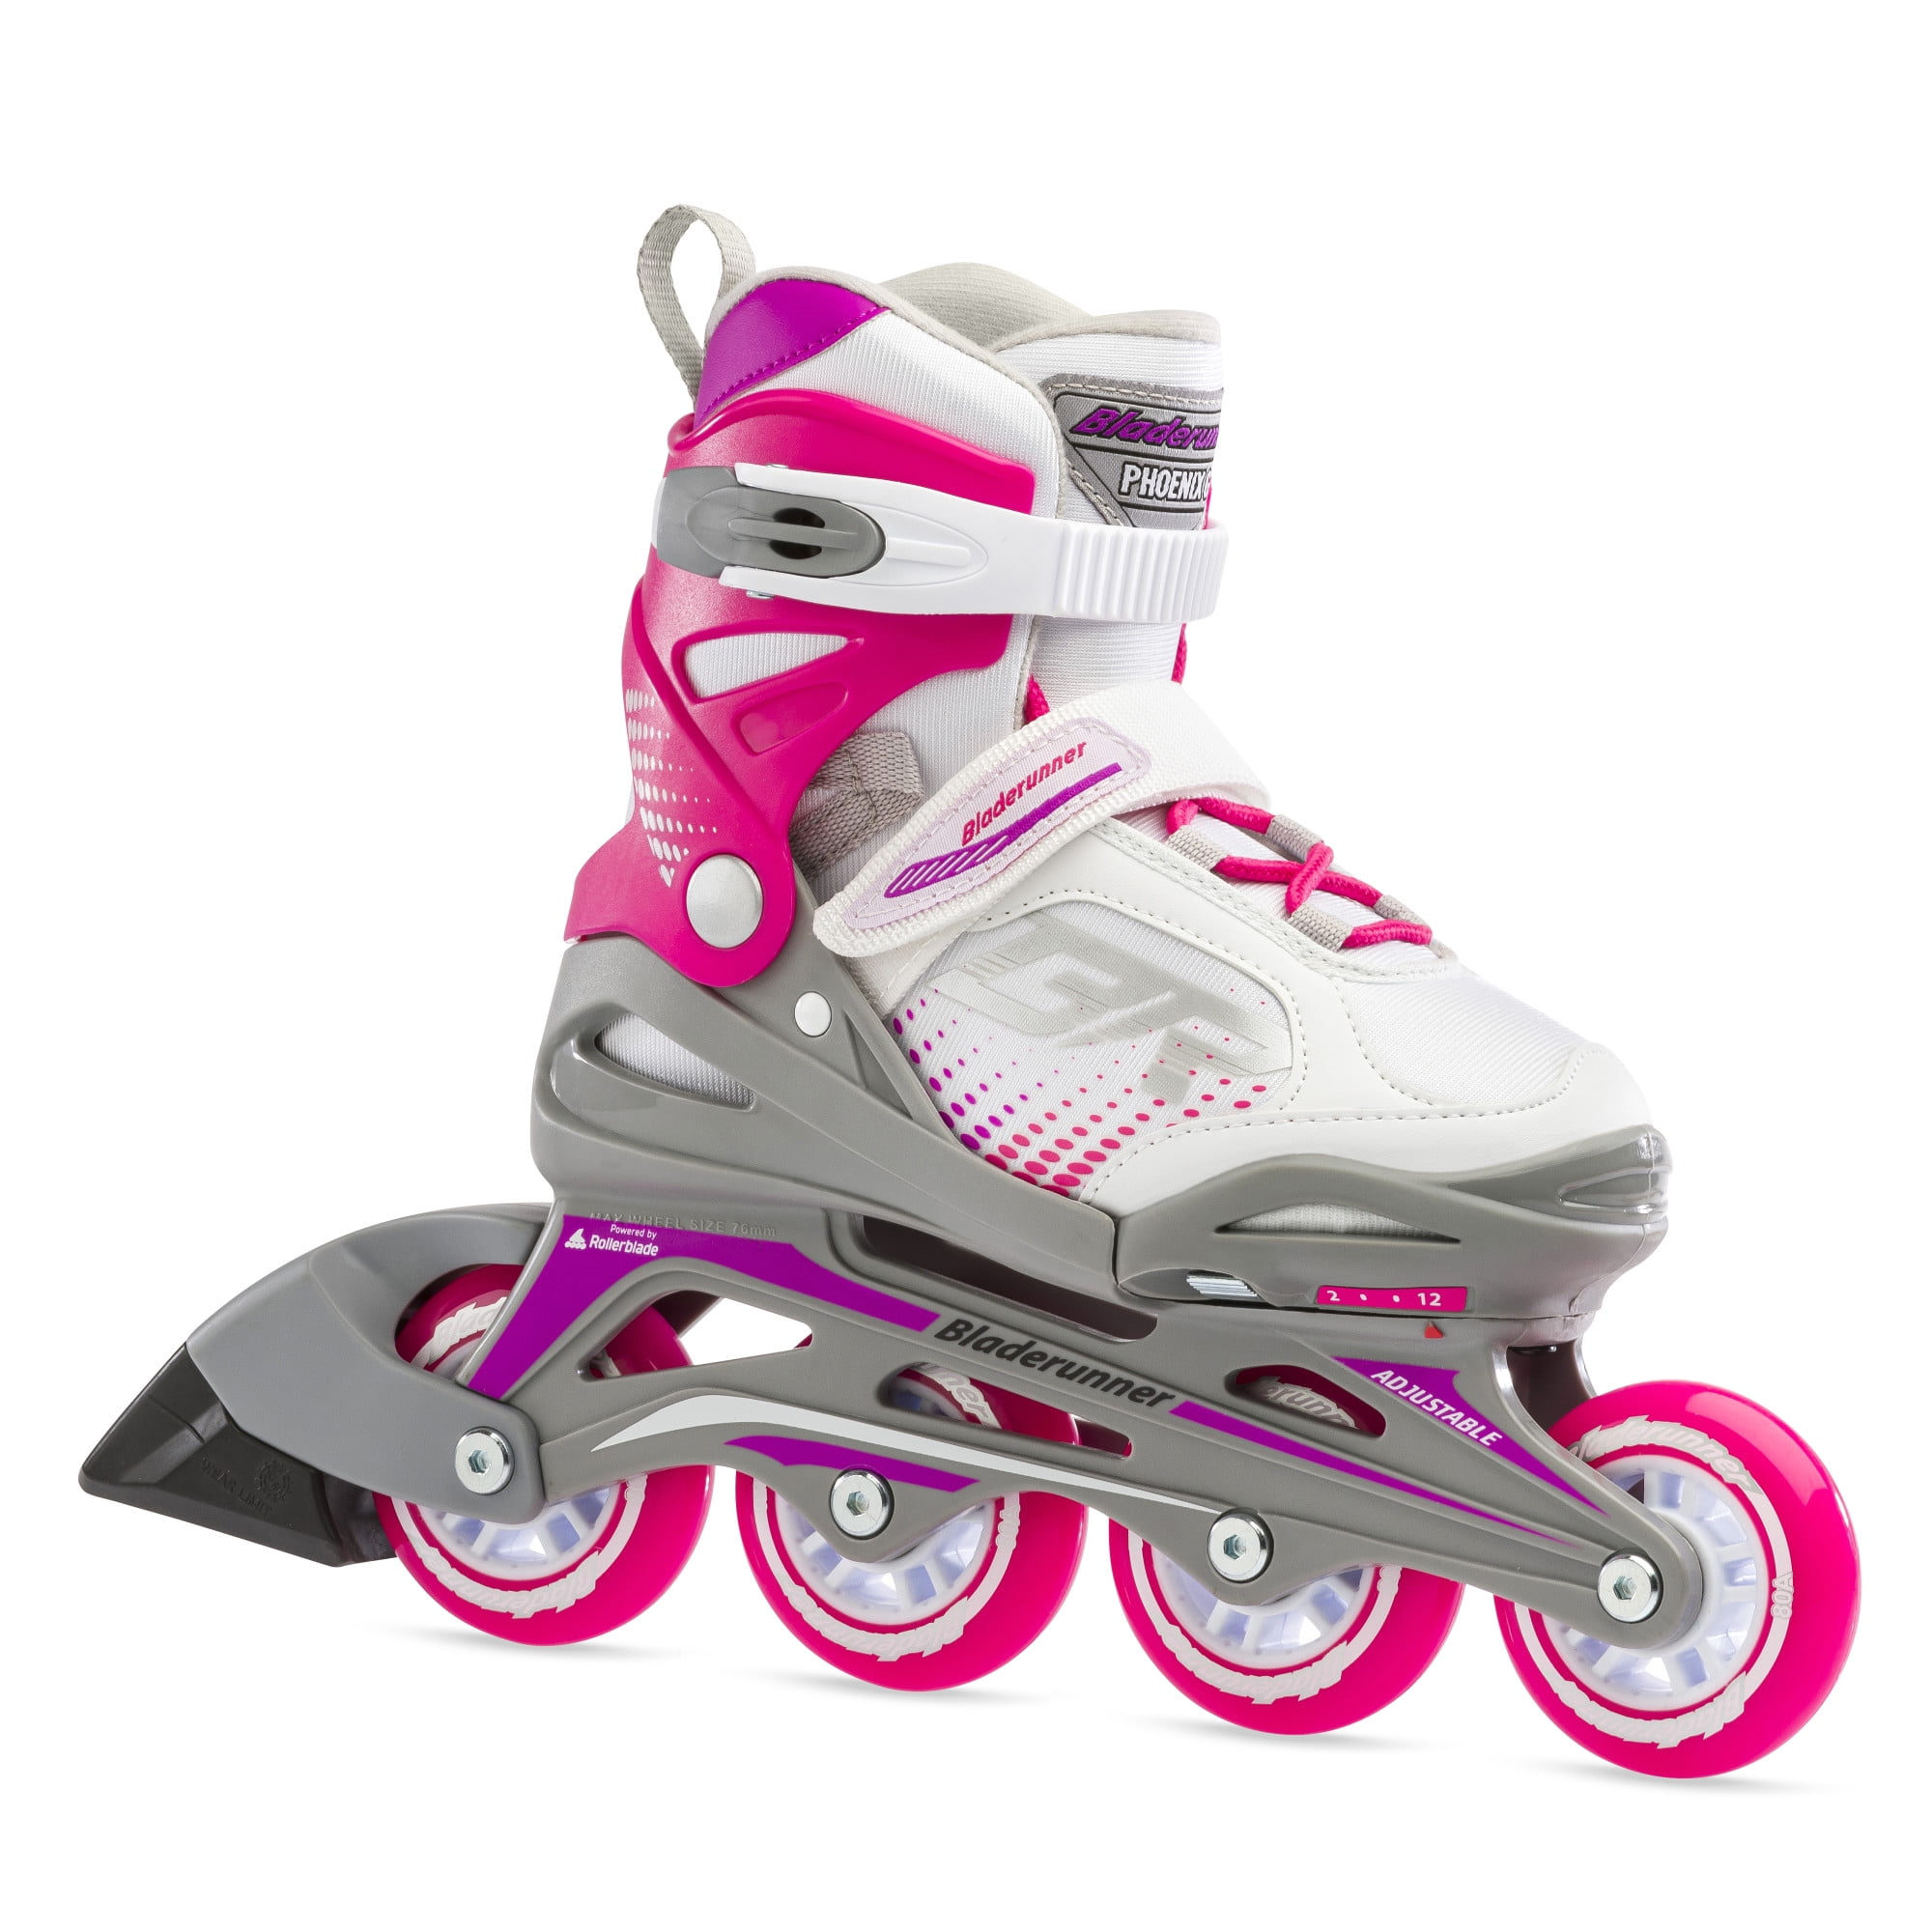 Details about   NEW Adjustable Inline Skates Roller Blades Adult Size 8-10.5 Breathable a e 136 